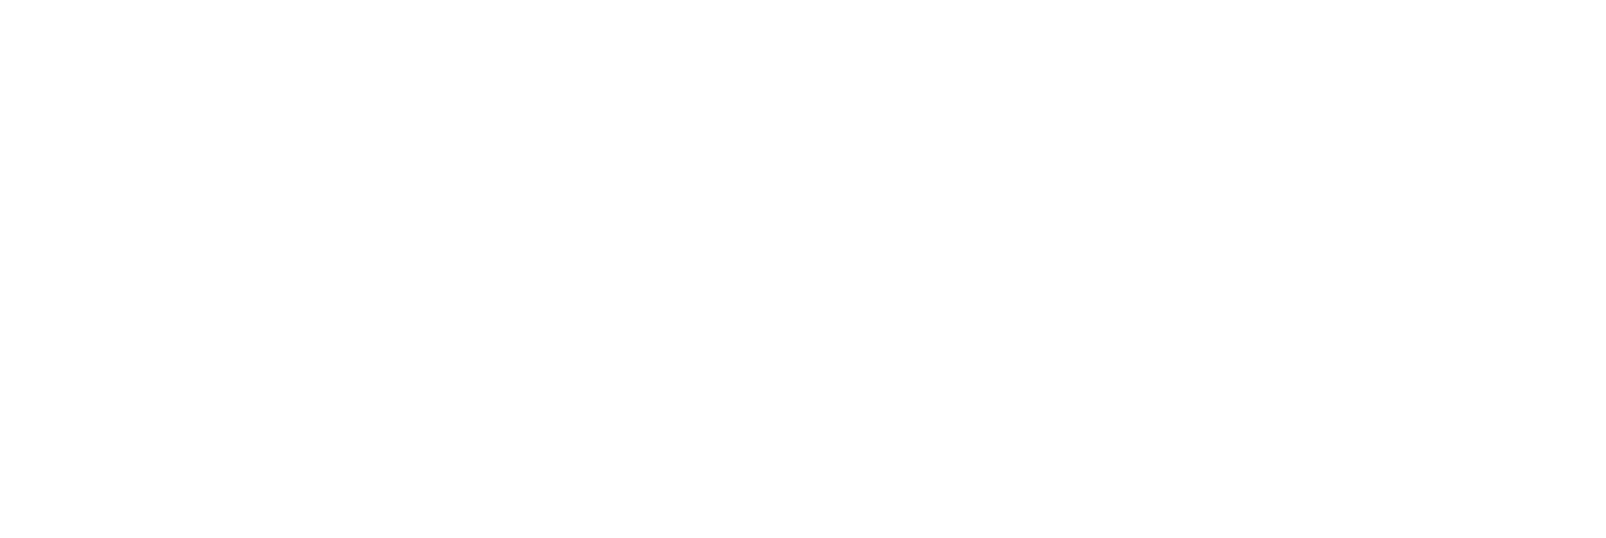 Join us for Beers and a Home Buying Class